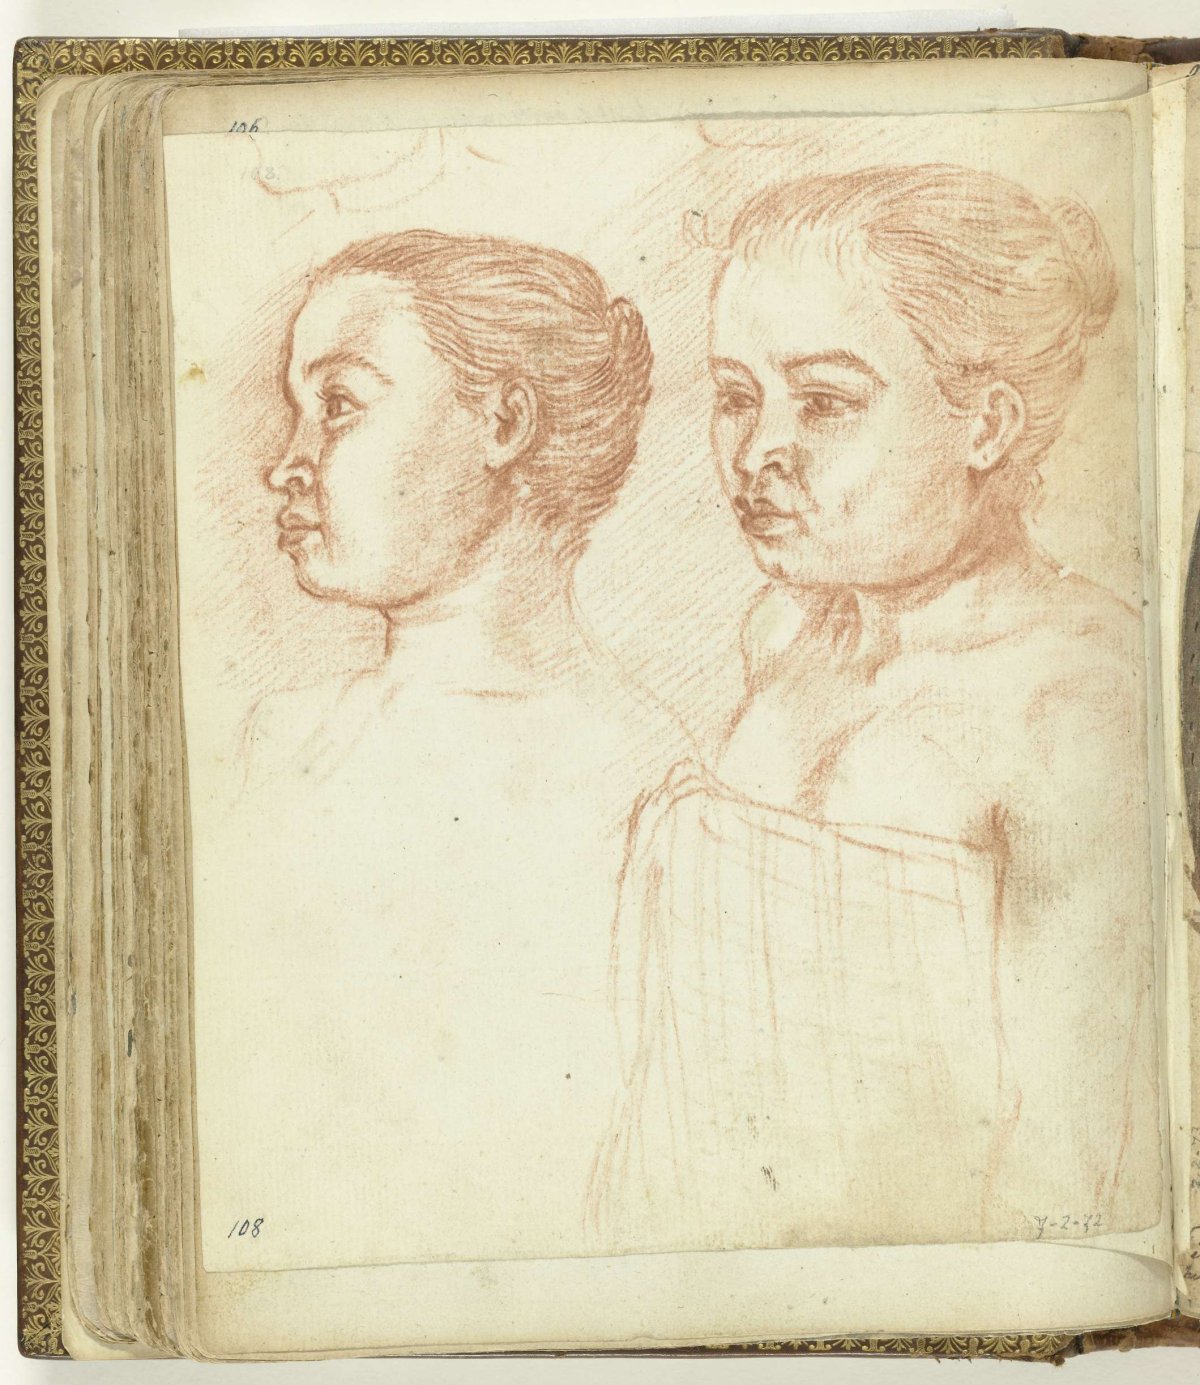 Two portraits of Rose, Jan Brandes, 1779 - 1785